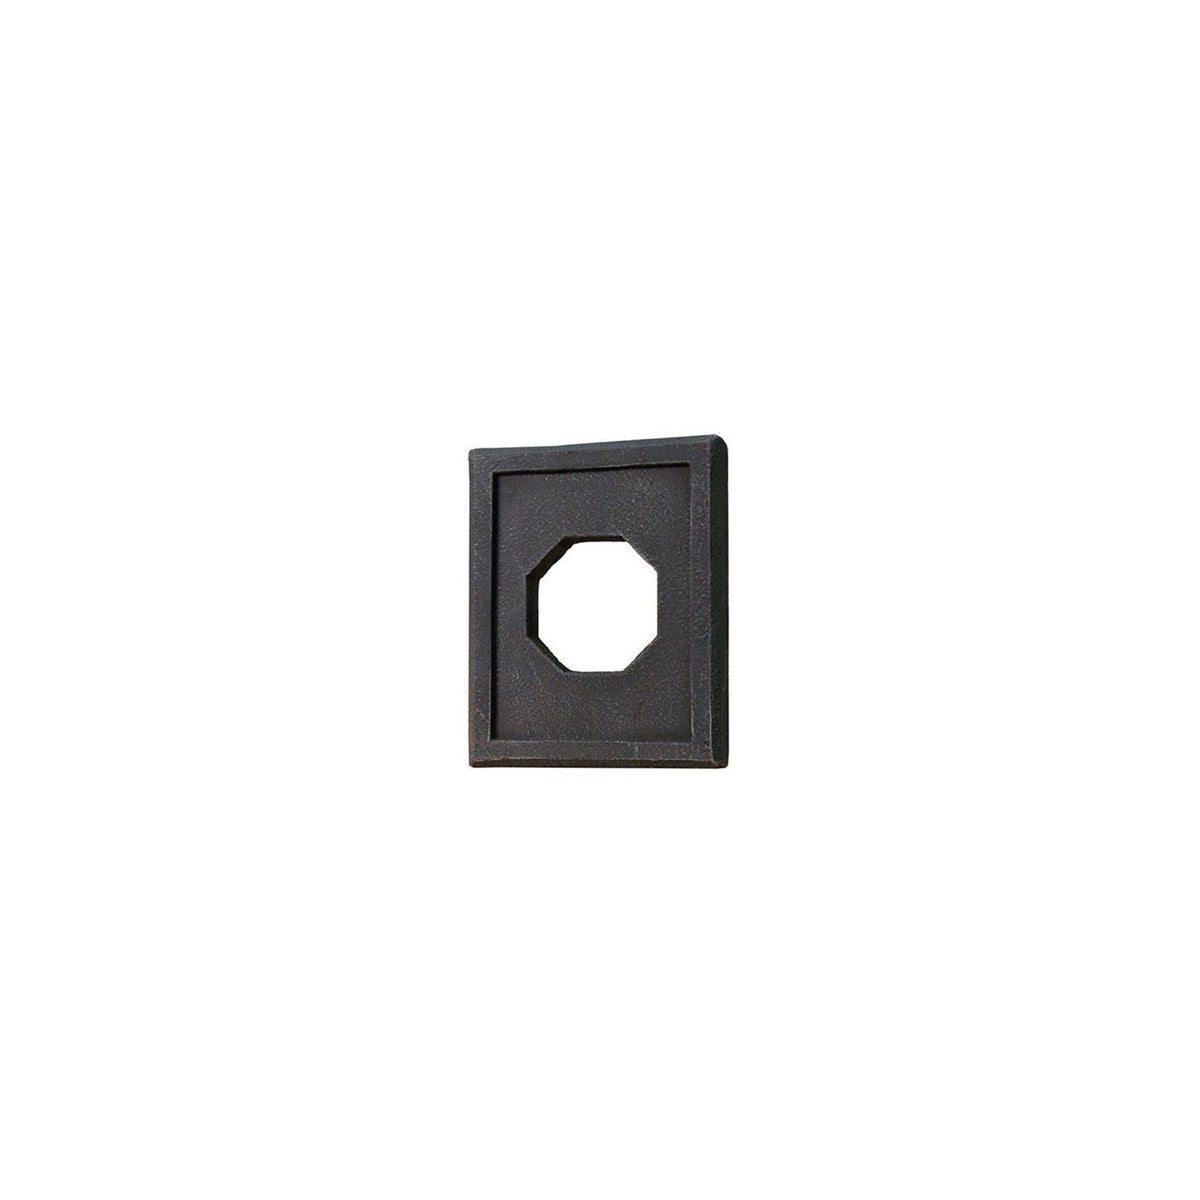 Quality Stone - Black - Fixture Trim-Faux Stone Accessories-Quality Stone-Black Blend-Wall Theory